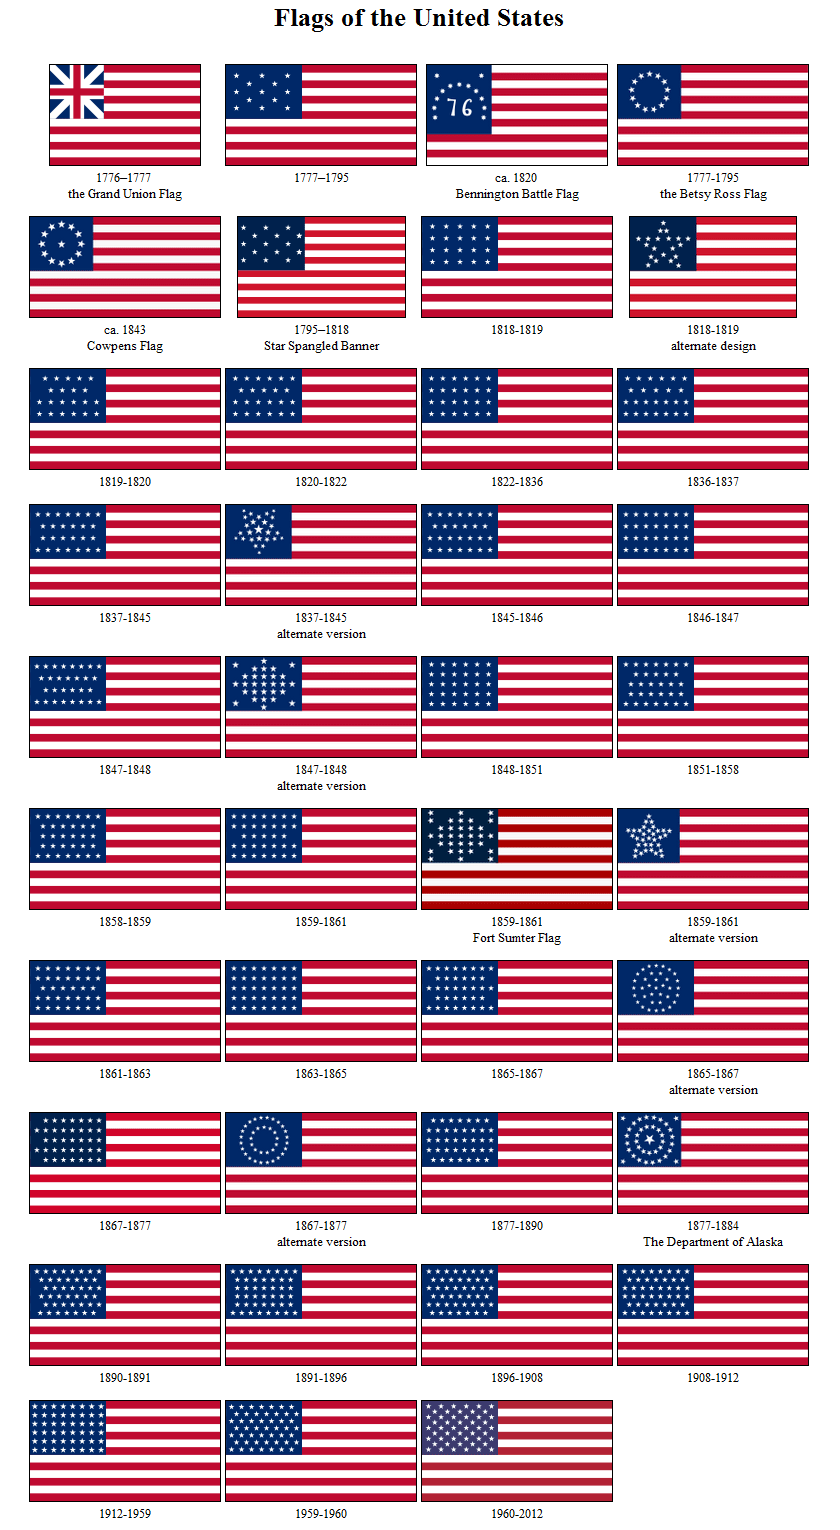 US FLAGS HISTORY